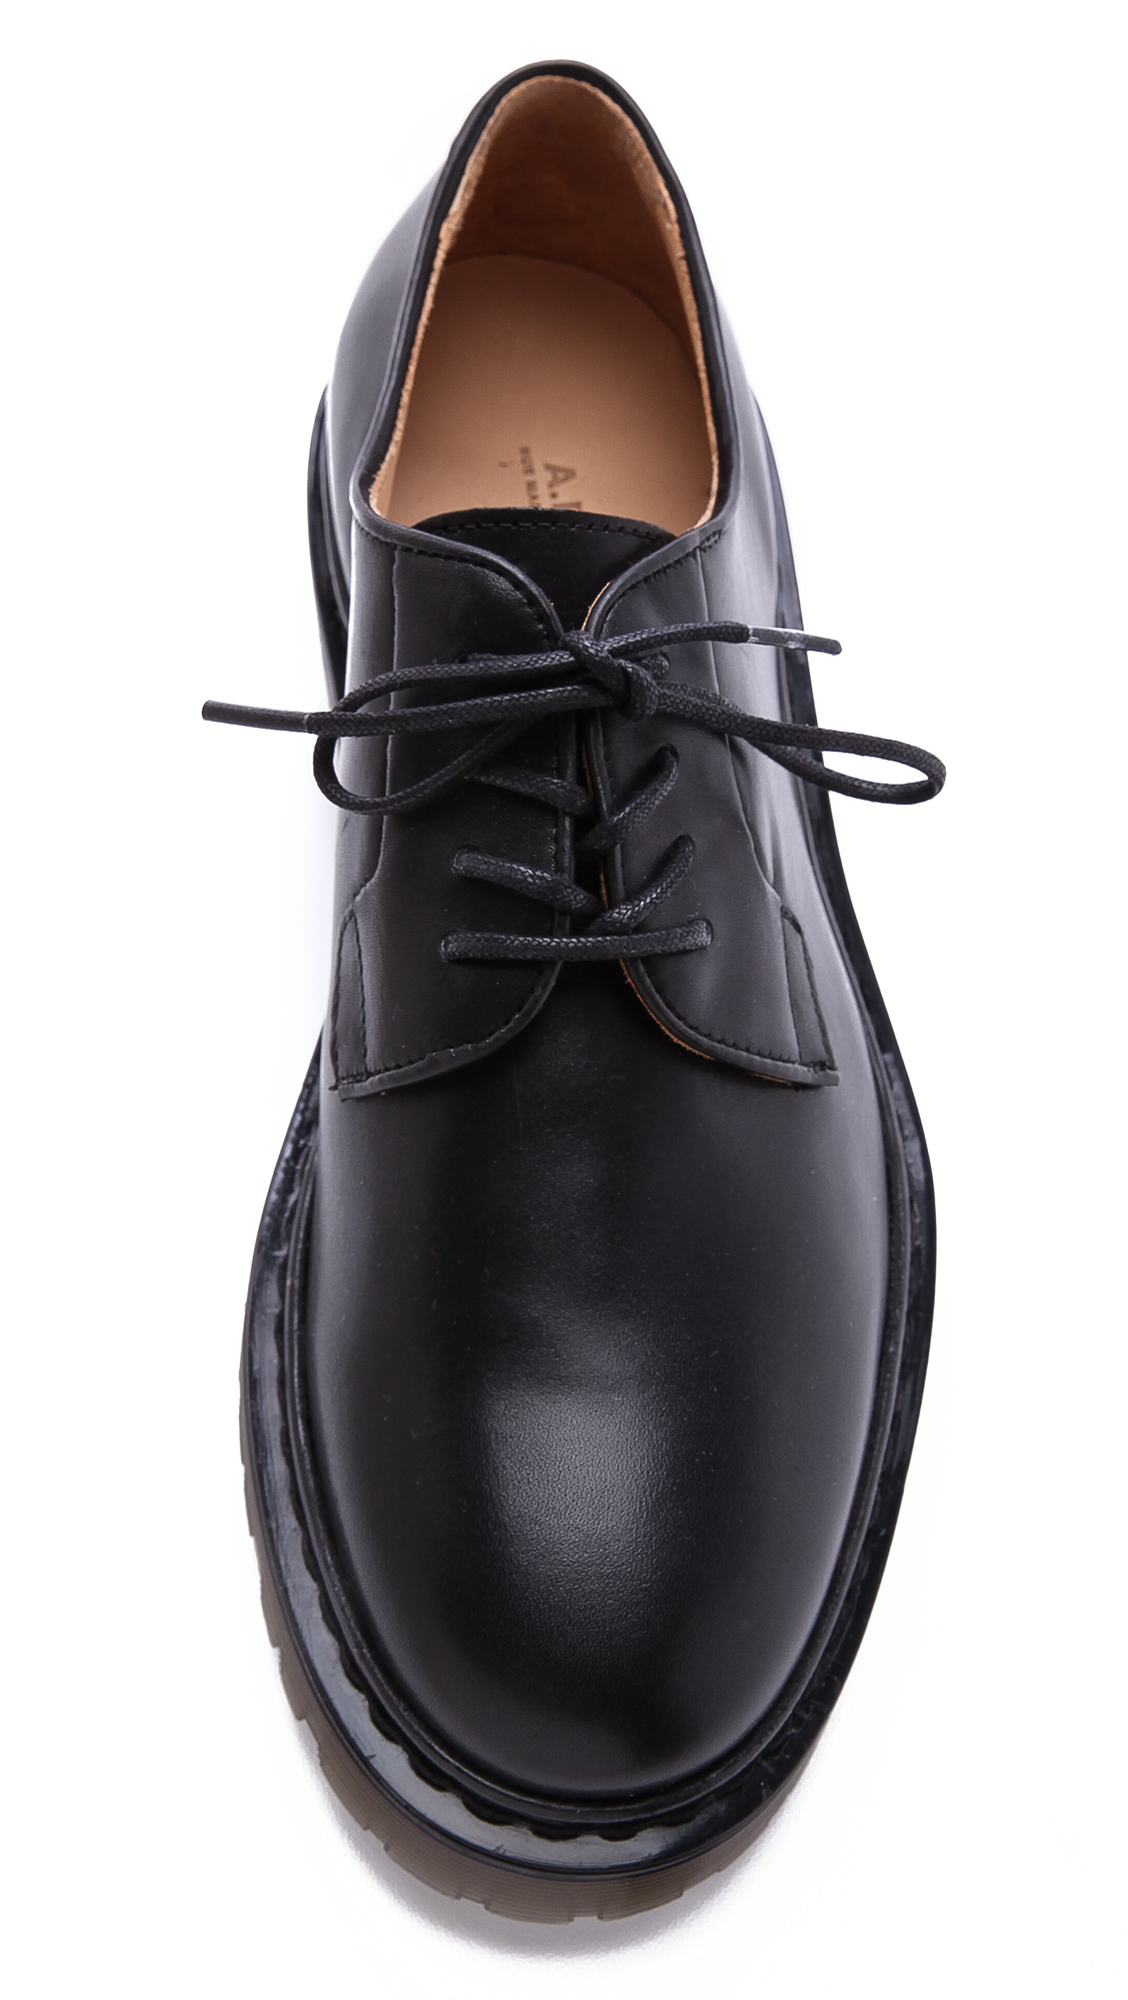 Lyst - A.P.C. Leather Derby Shoes in Black for Men